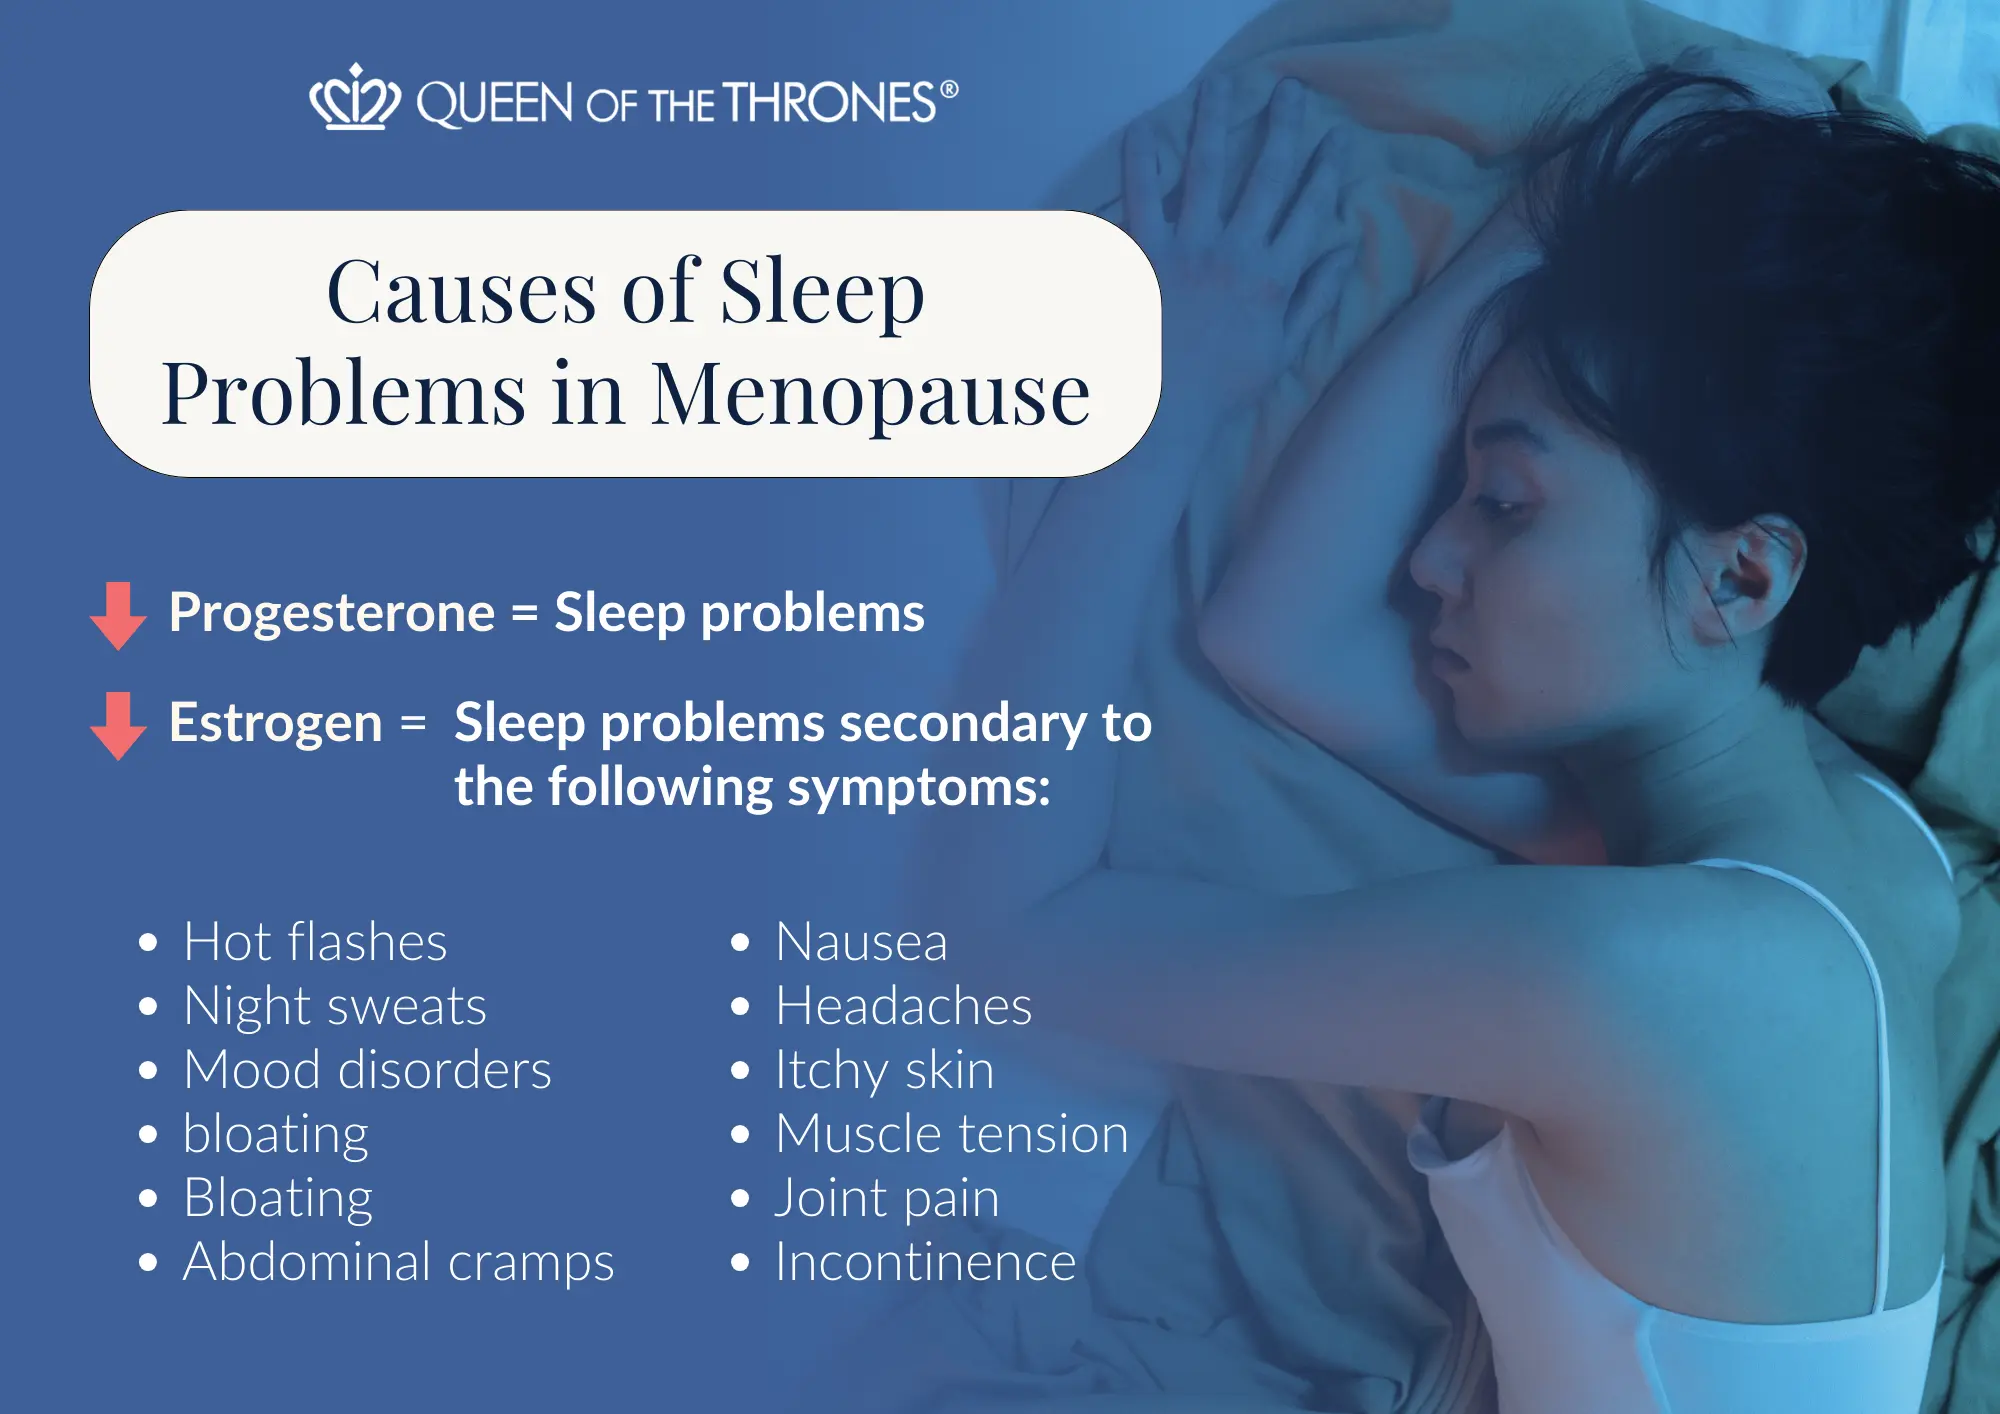 Causes of sleep problems in menopause by Queen of the Thrones